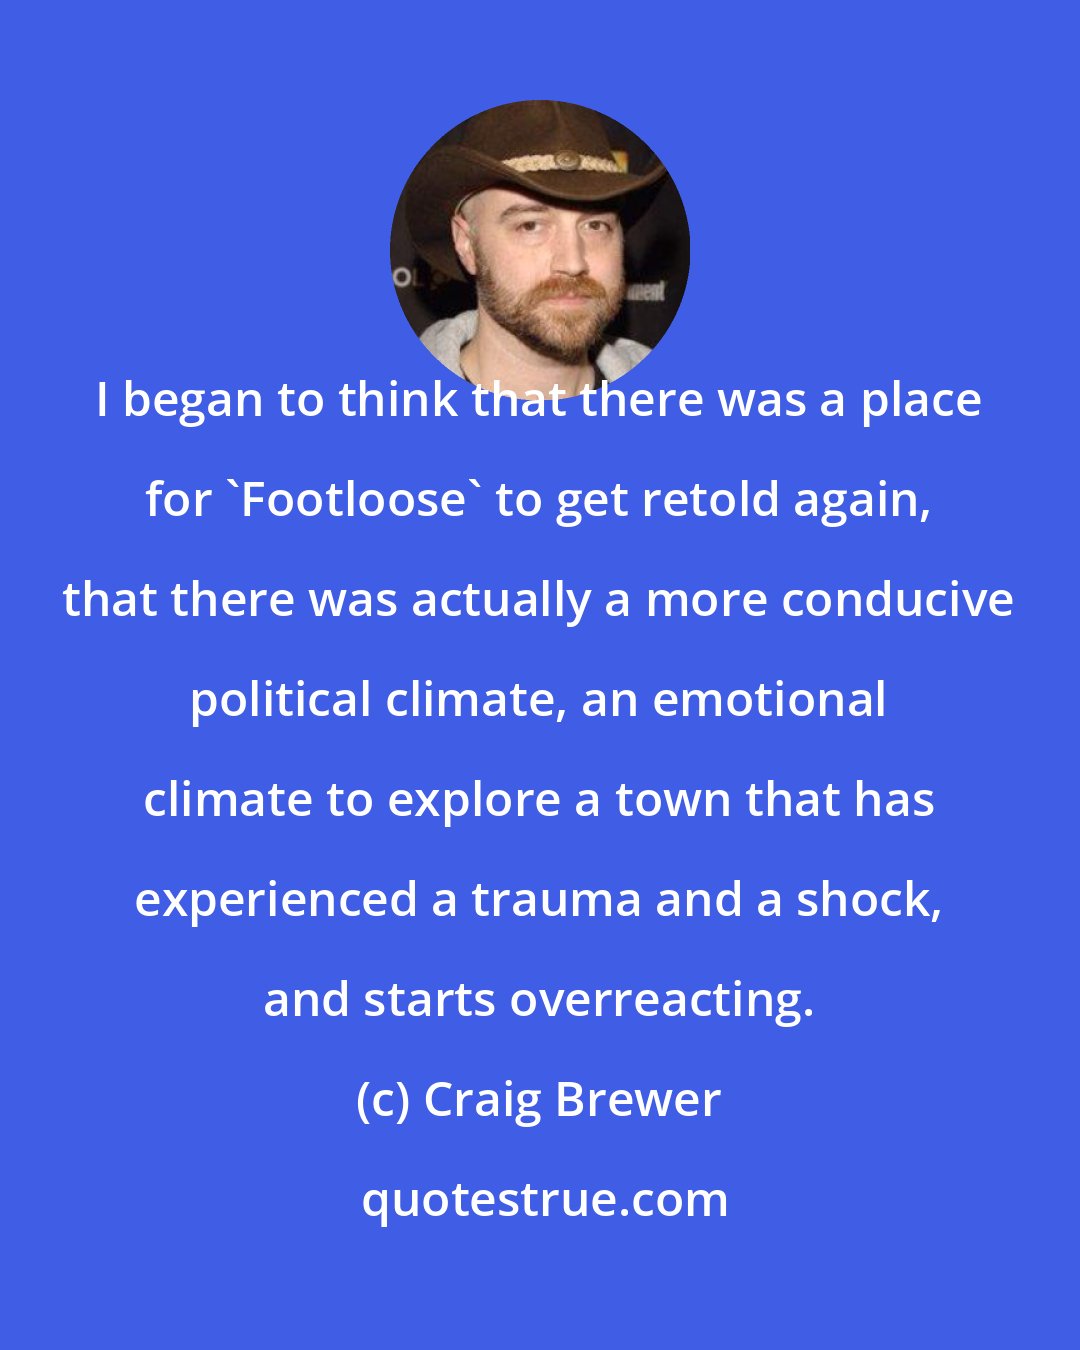 Craig Brewer: I began to think that there was a place for 'Footloose' to get retold again, that there was actually a more conducive political climate, an emotional climate to explore a town that has experienced a trauma and a shock, and starts overreacting.